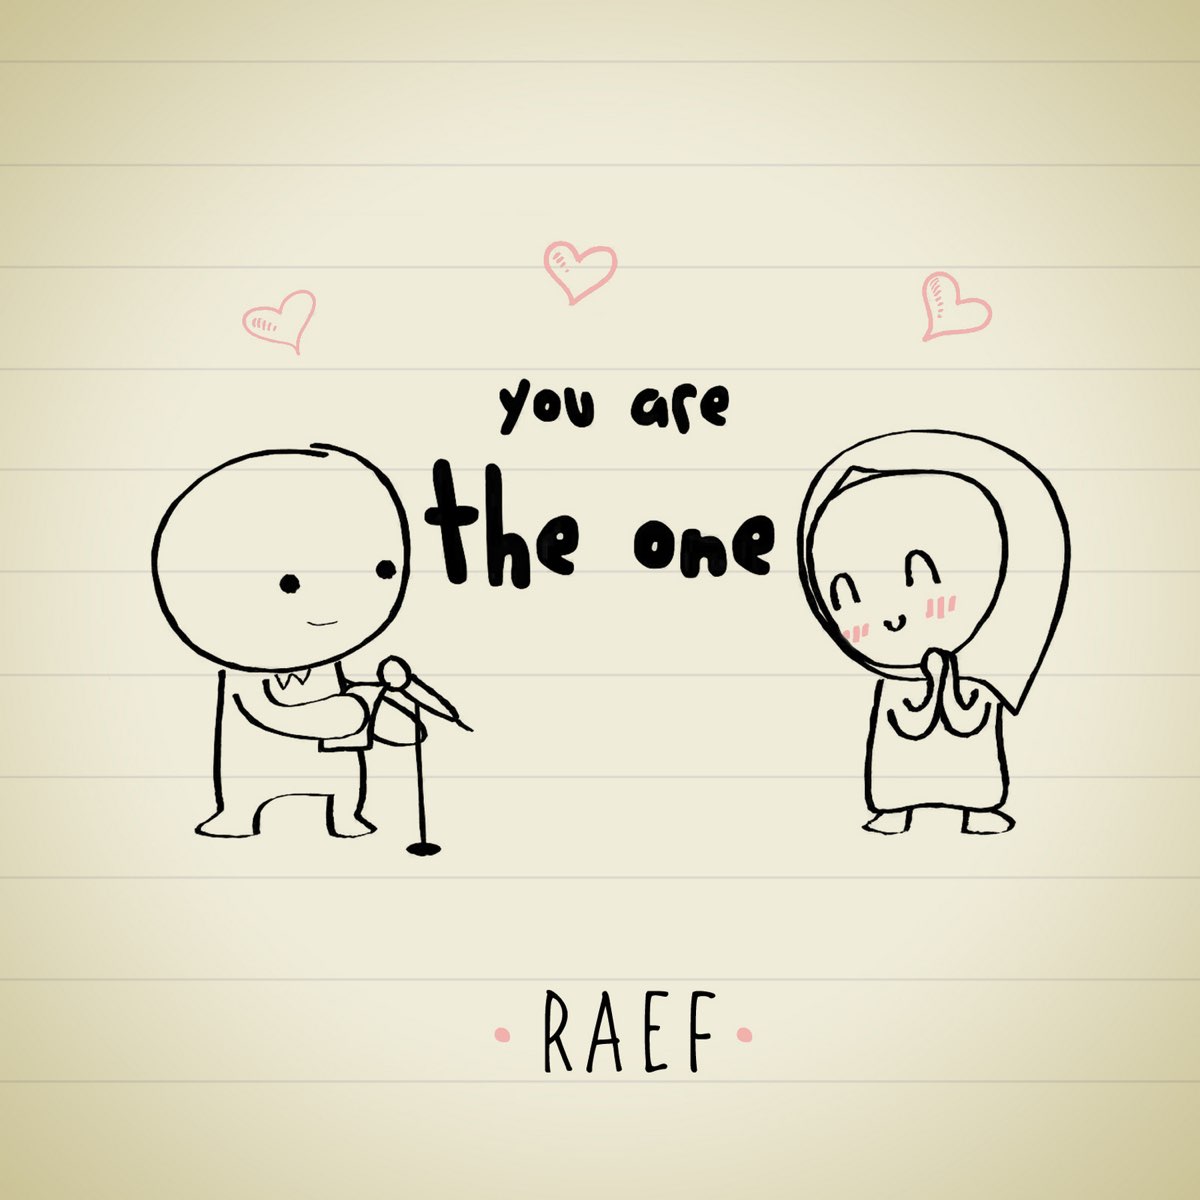 Cause you re the best. You are the one. You are the one песня. You are my one. Raef.